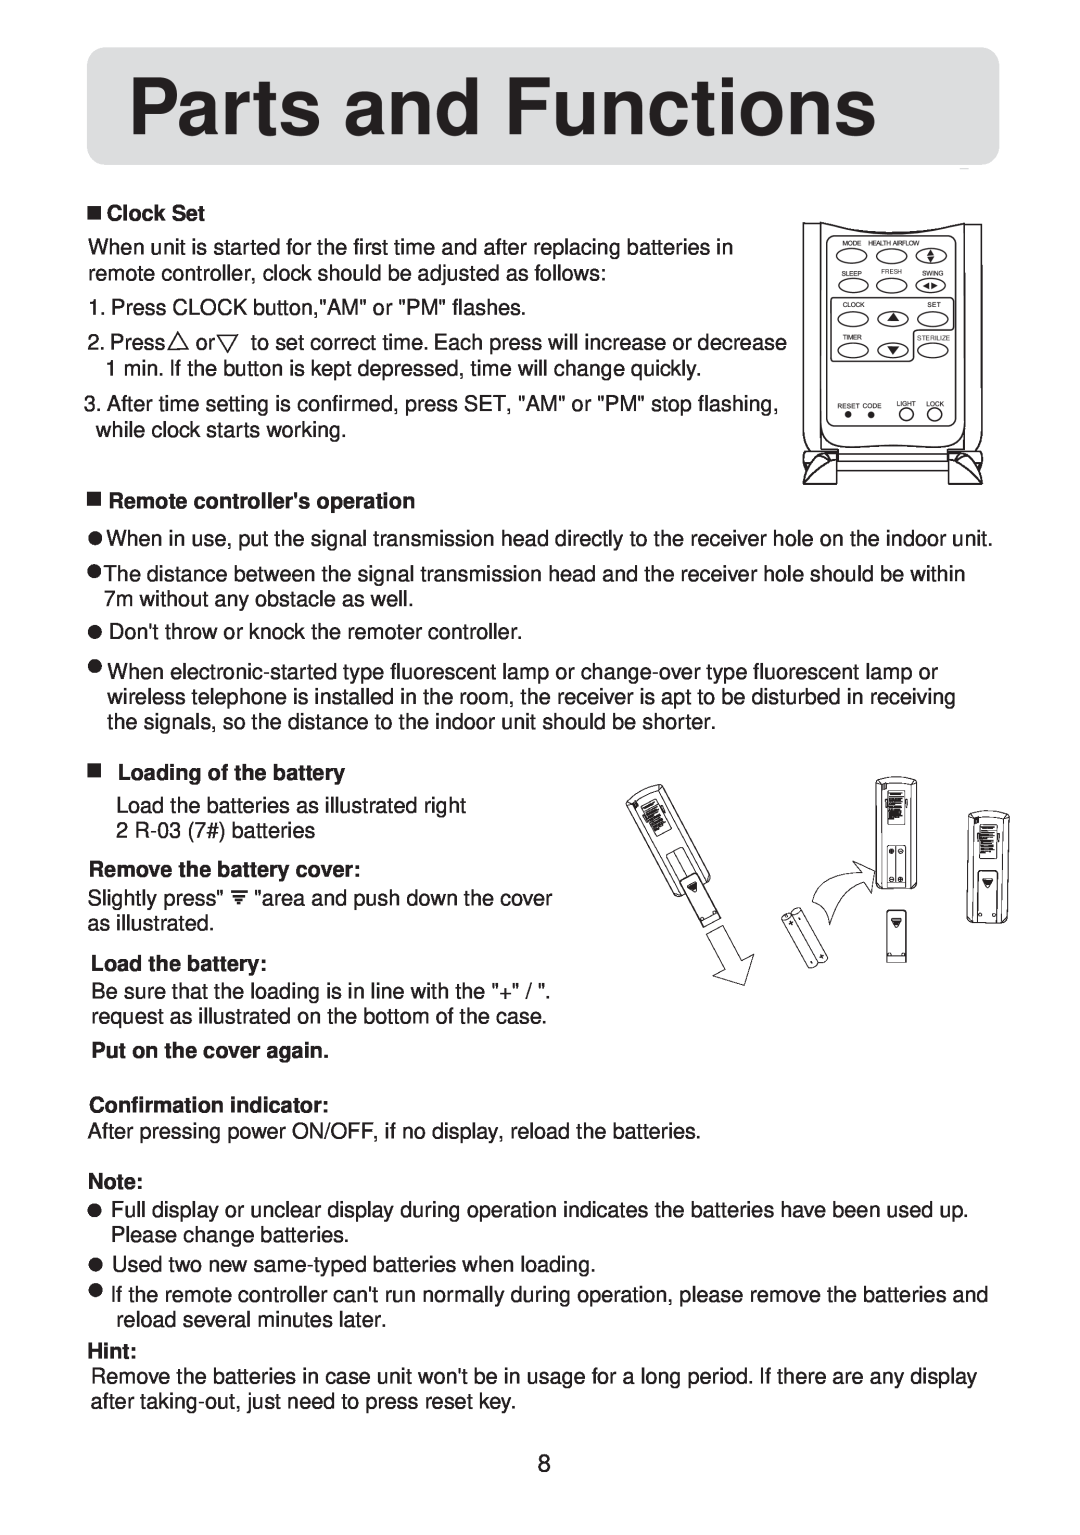 Haier HSU-12HV03/R2(SDB) Parts and Functions, Clock Set, Remote controllers operation, Loading of the battery, Hint 